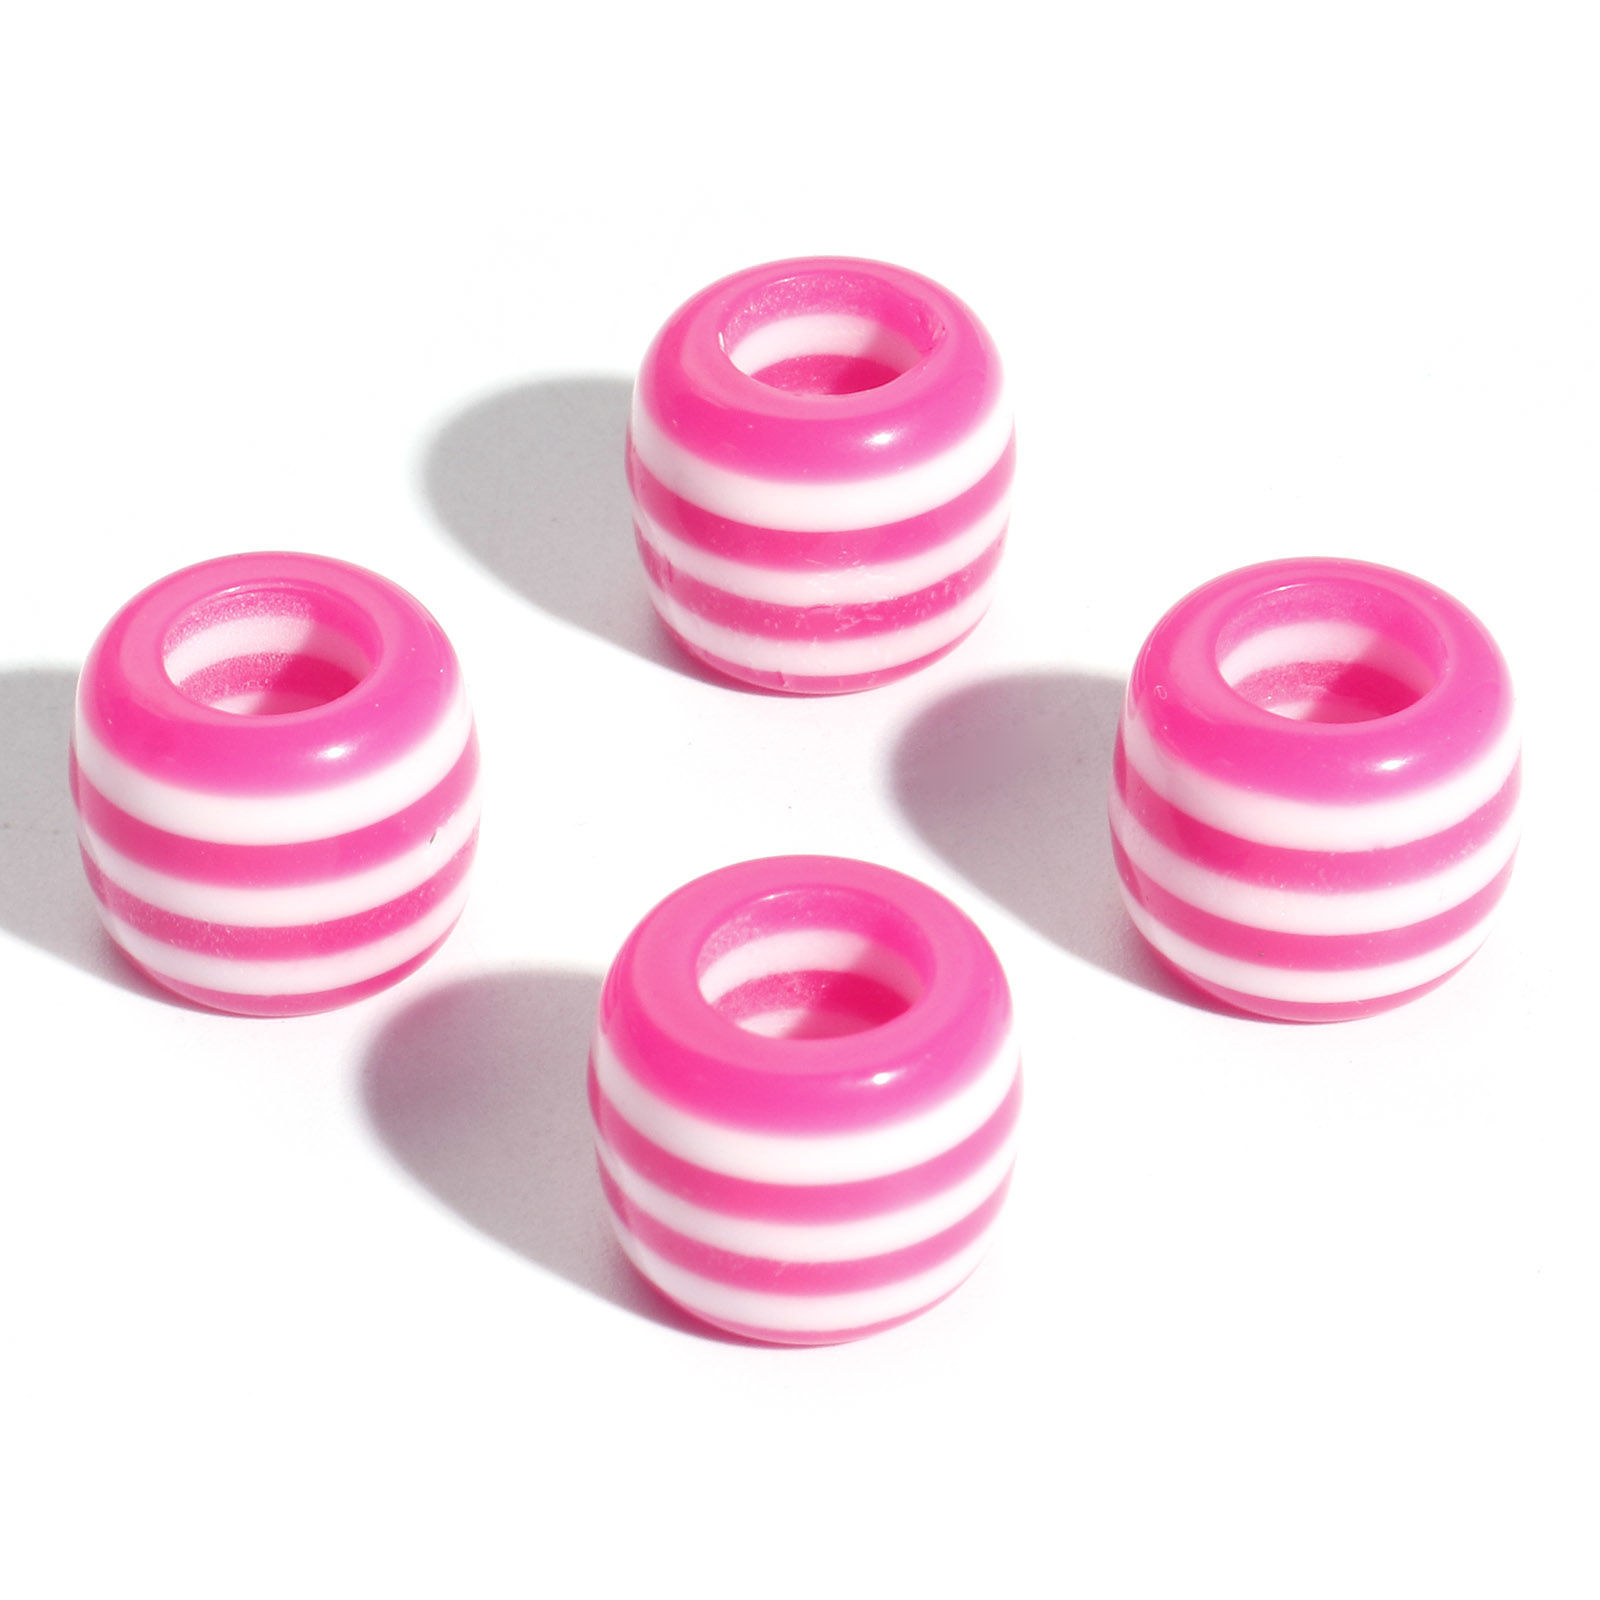 Picture of Resin European Style Large Hole Charm Beads Fuchsia Drum Stripe 12mm x 10mm, Hole: Approx 5.8mm, 20 PCs